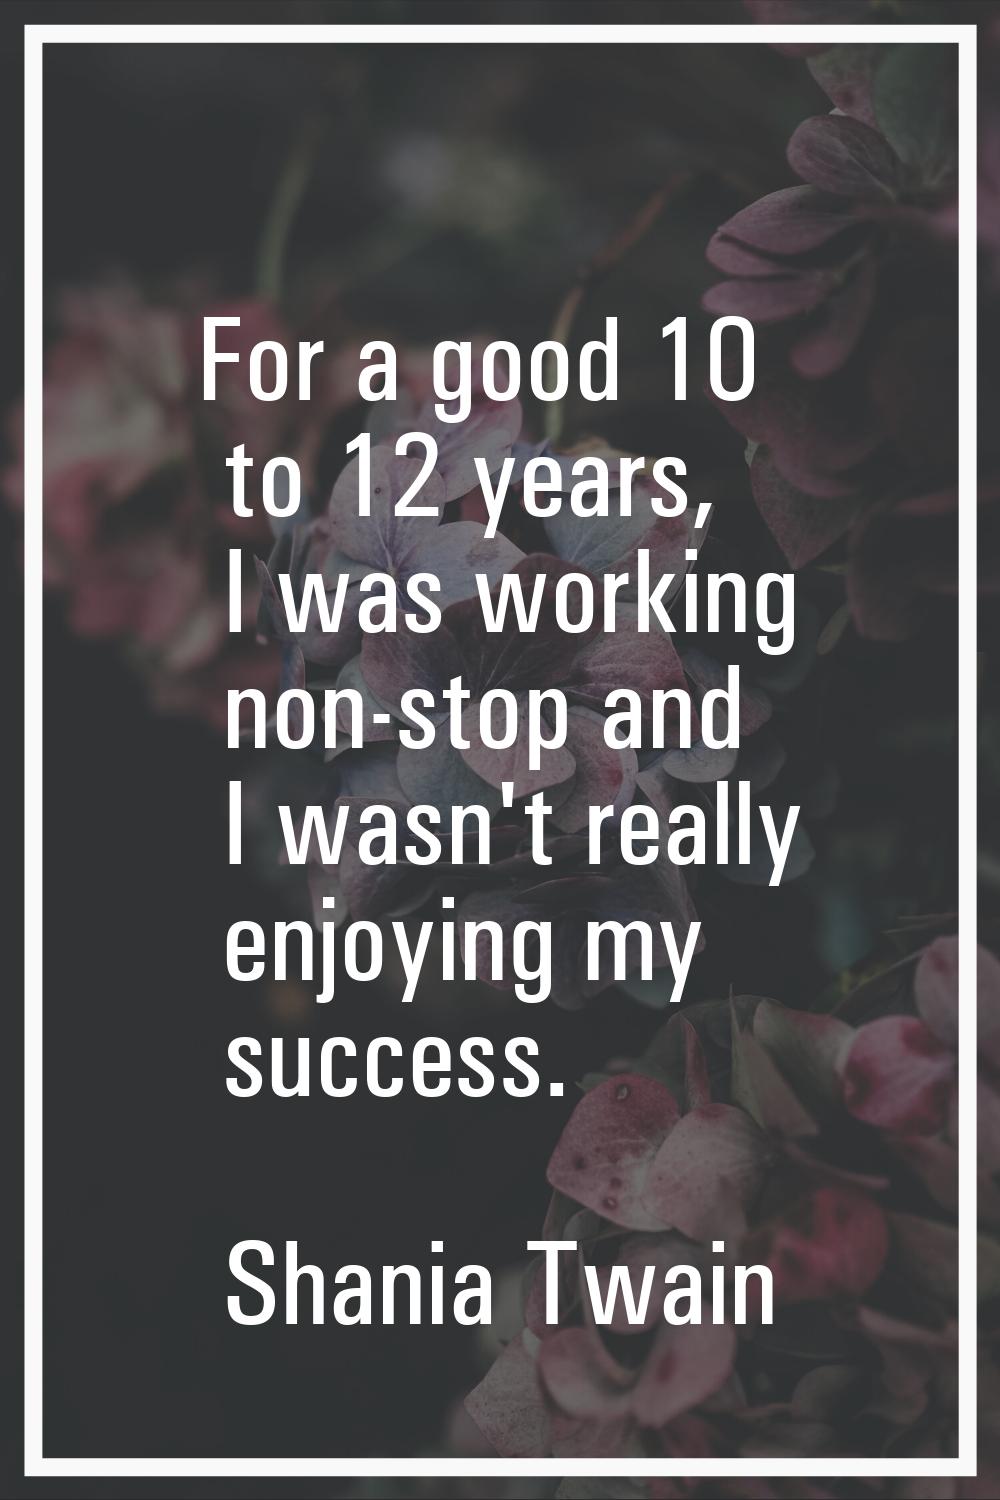 For a good 10 to 12 years, I was working non-stop and I wasn't really enjoying my success.